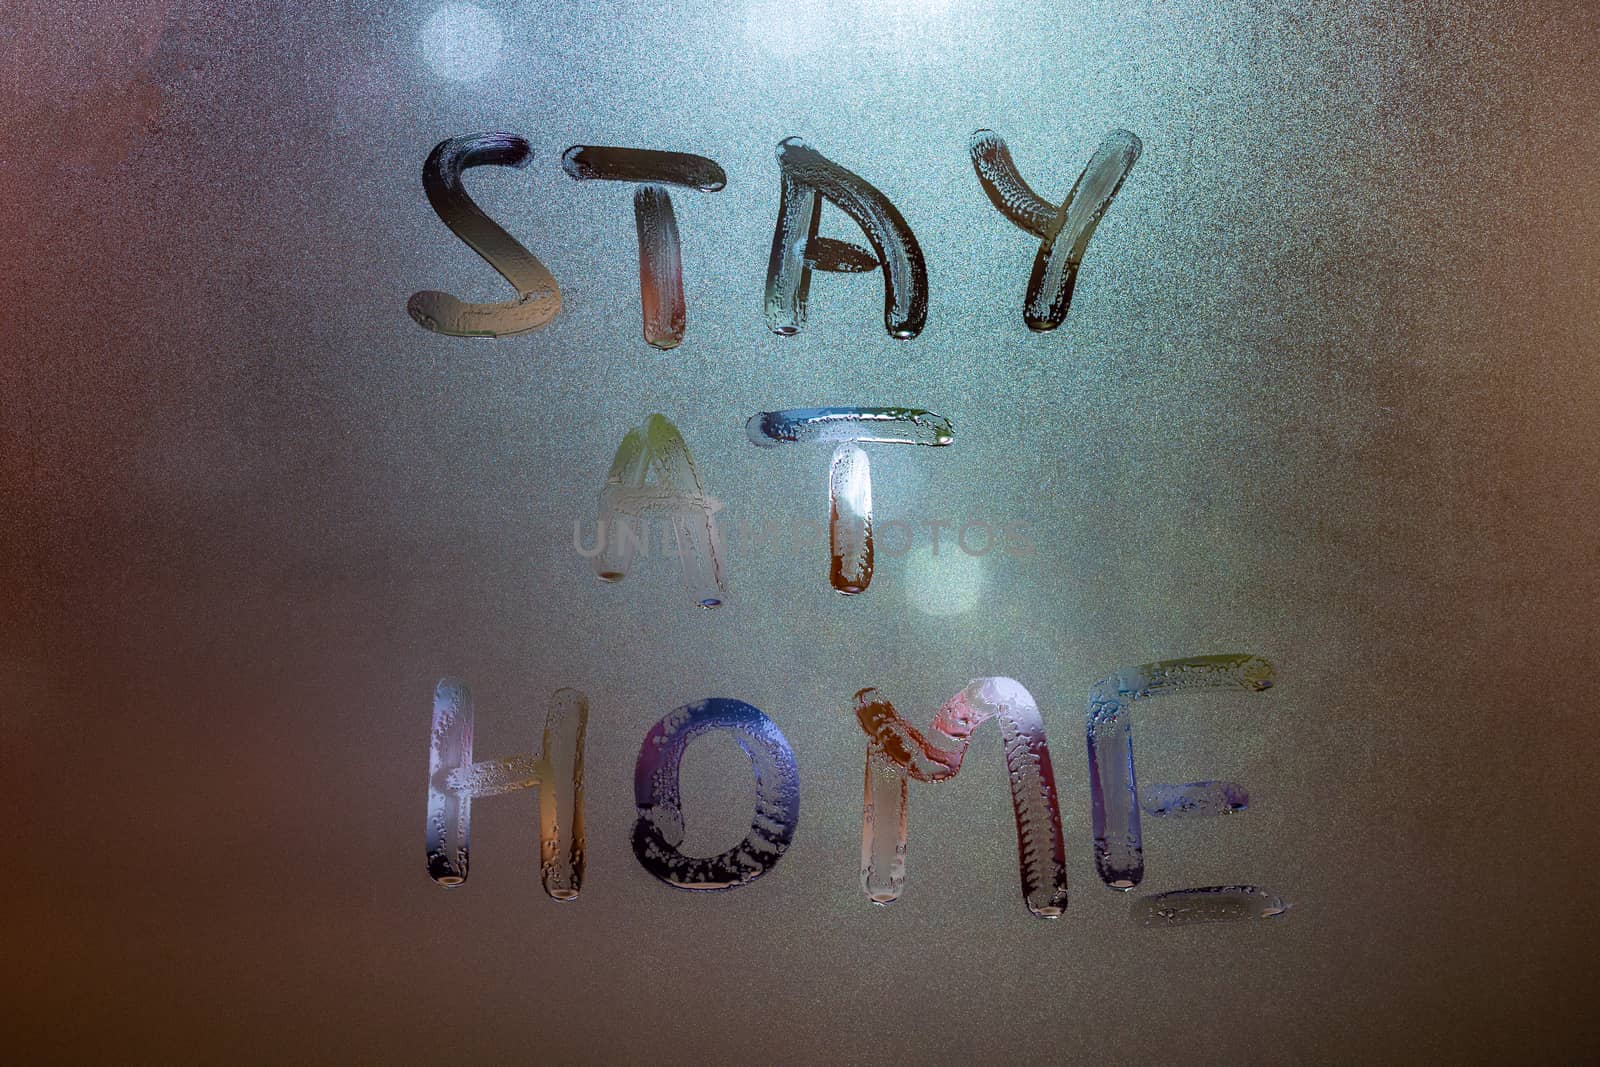 the words stay at home handwritten on wet window glass at night - close-up full frame picture with selective focus and background blur